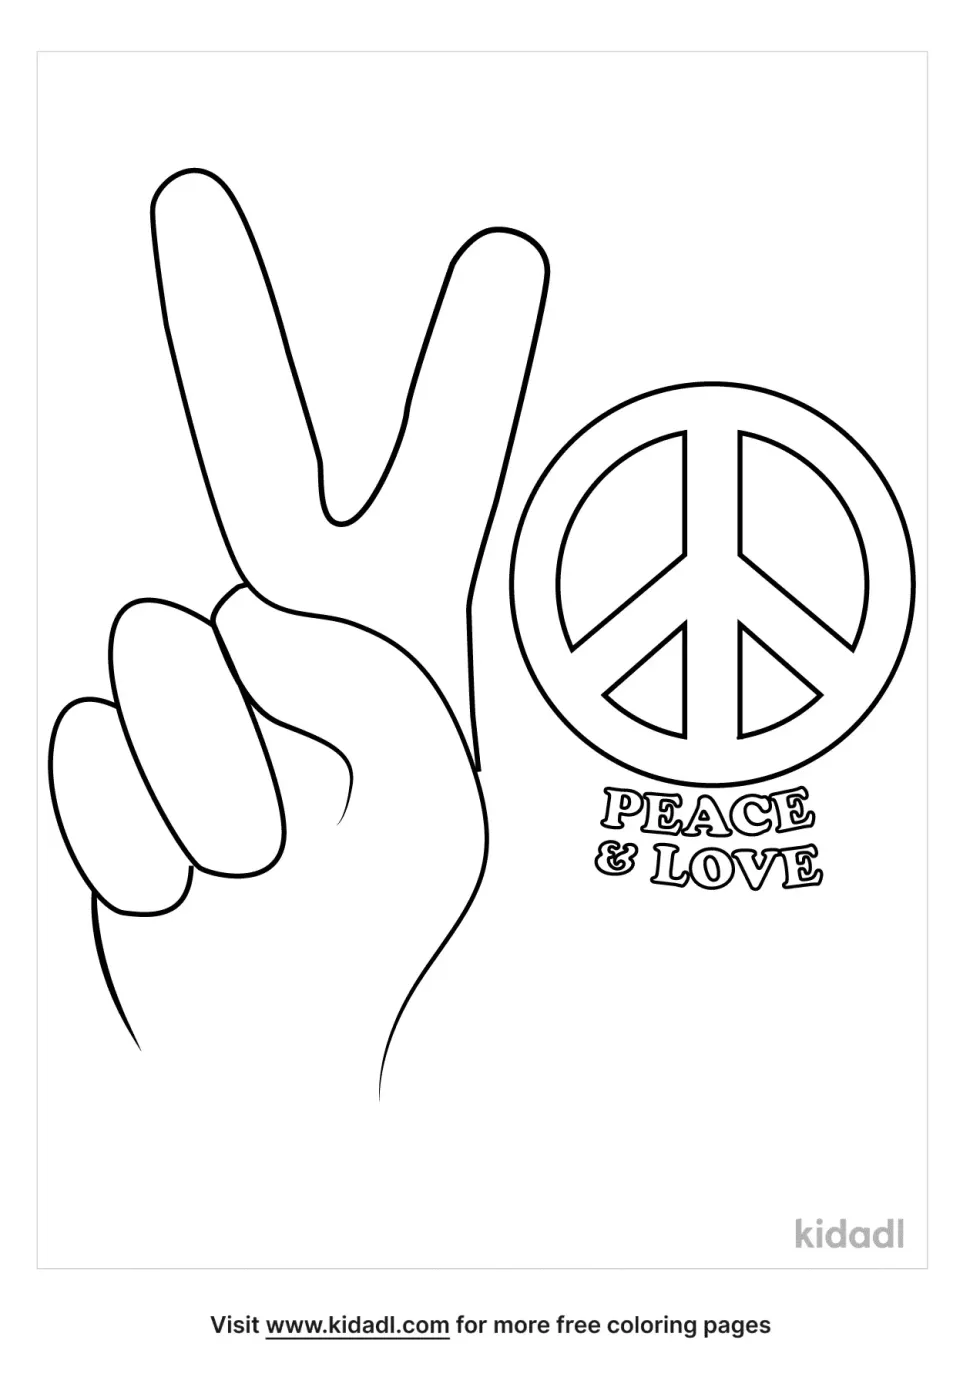 Hippie Protest Sign Coloring Page